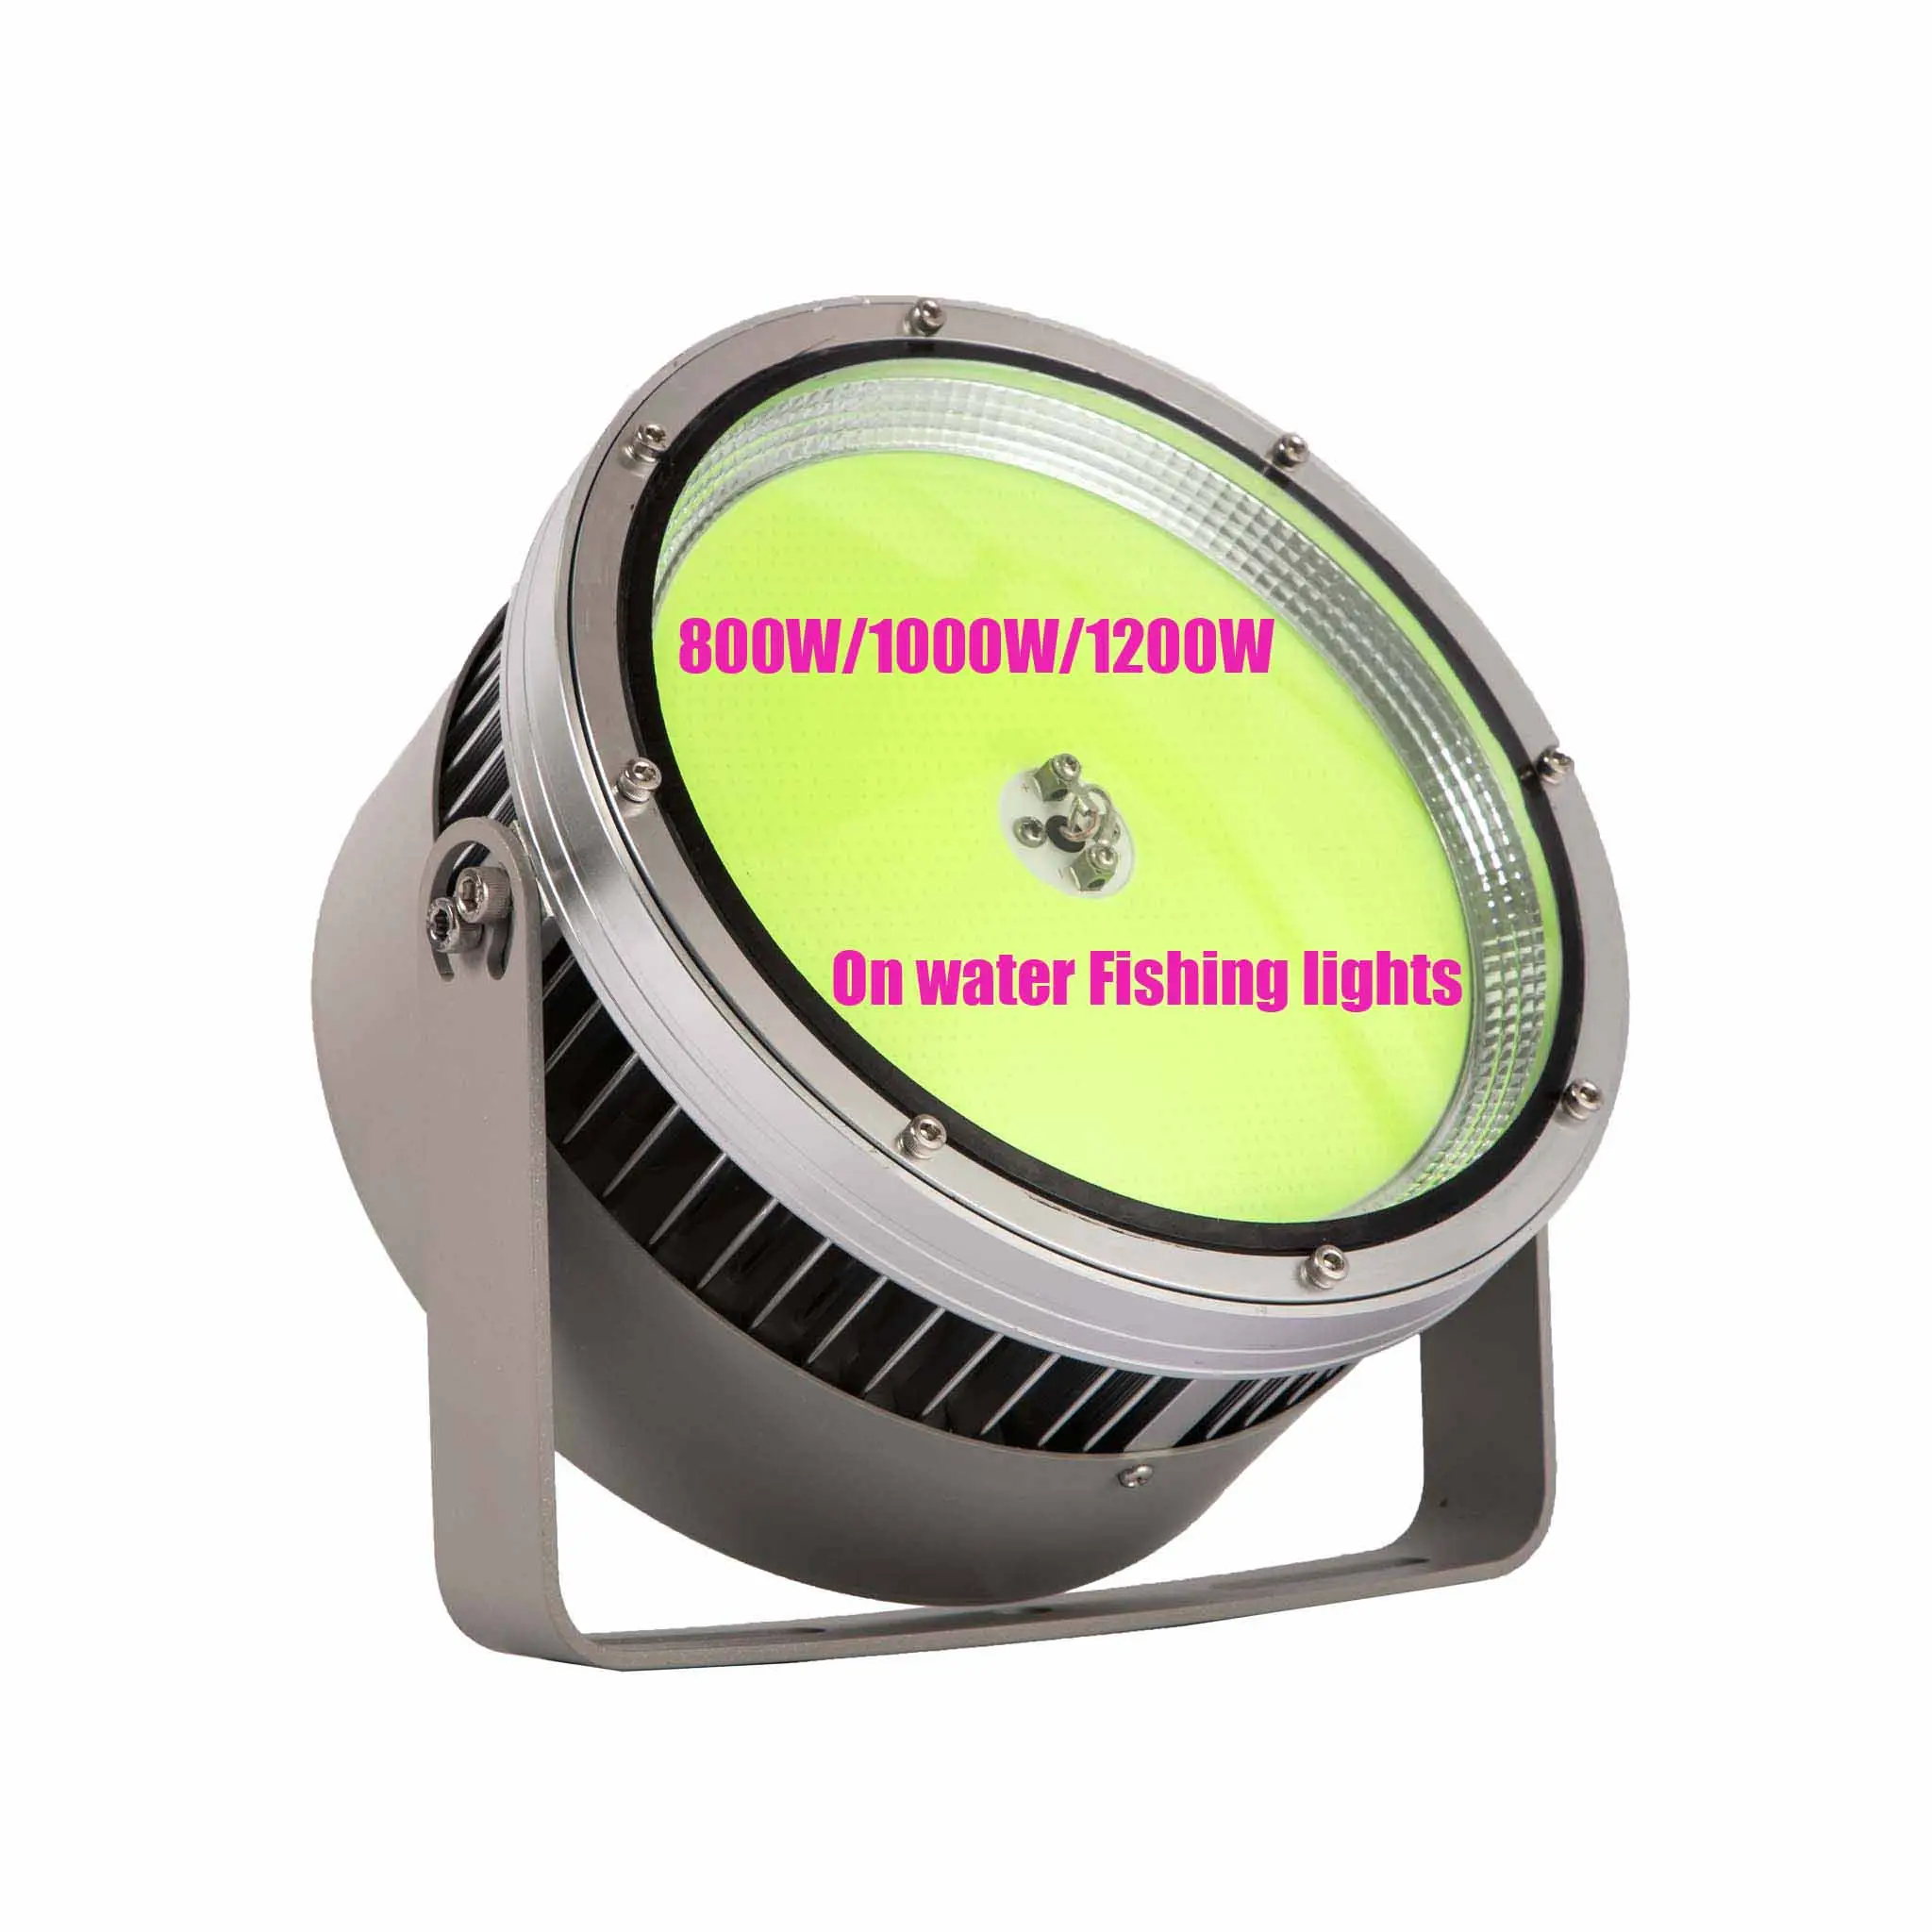 led fishing light 800w1000w1200w On Water Fishing Lights Ship Lamp Squid Attracts Lights